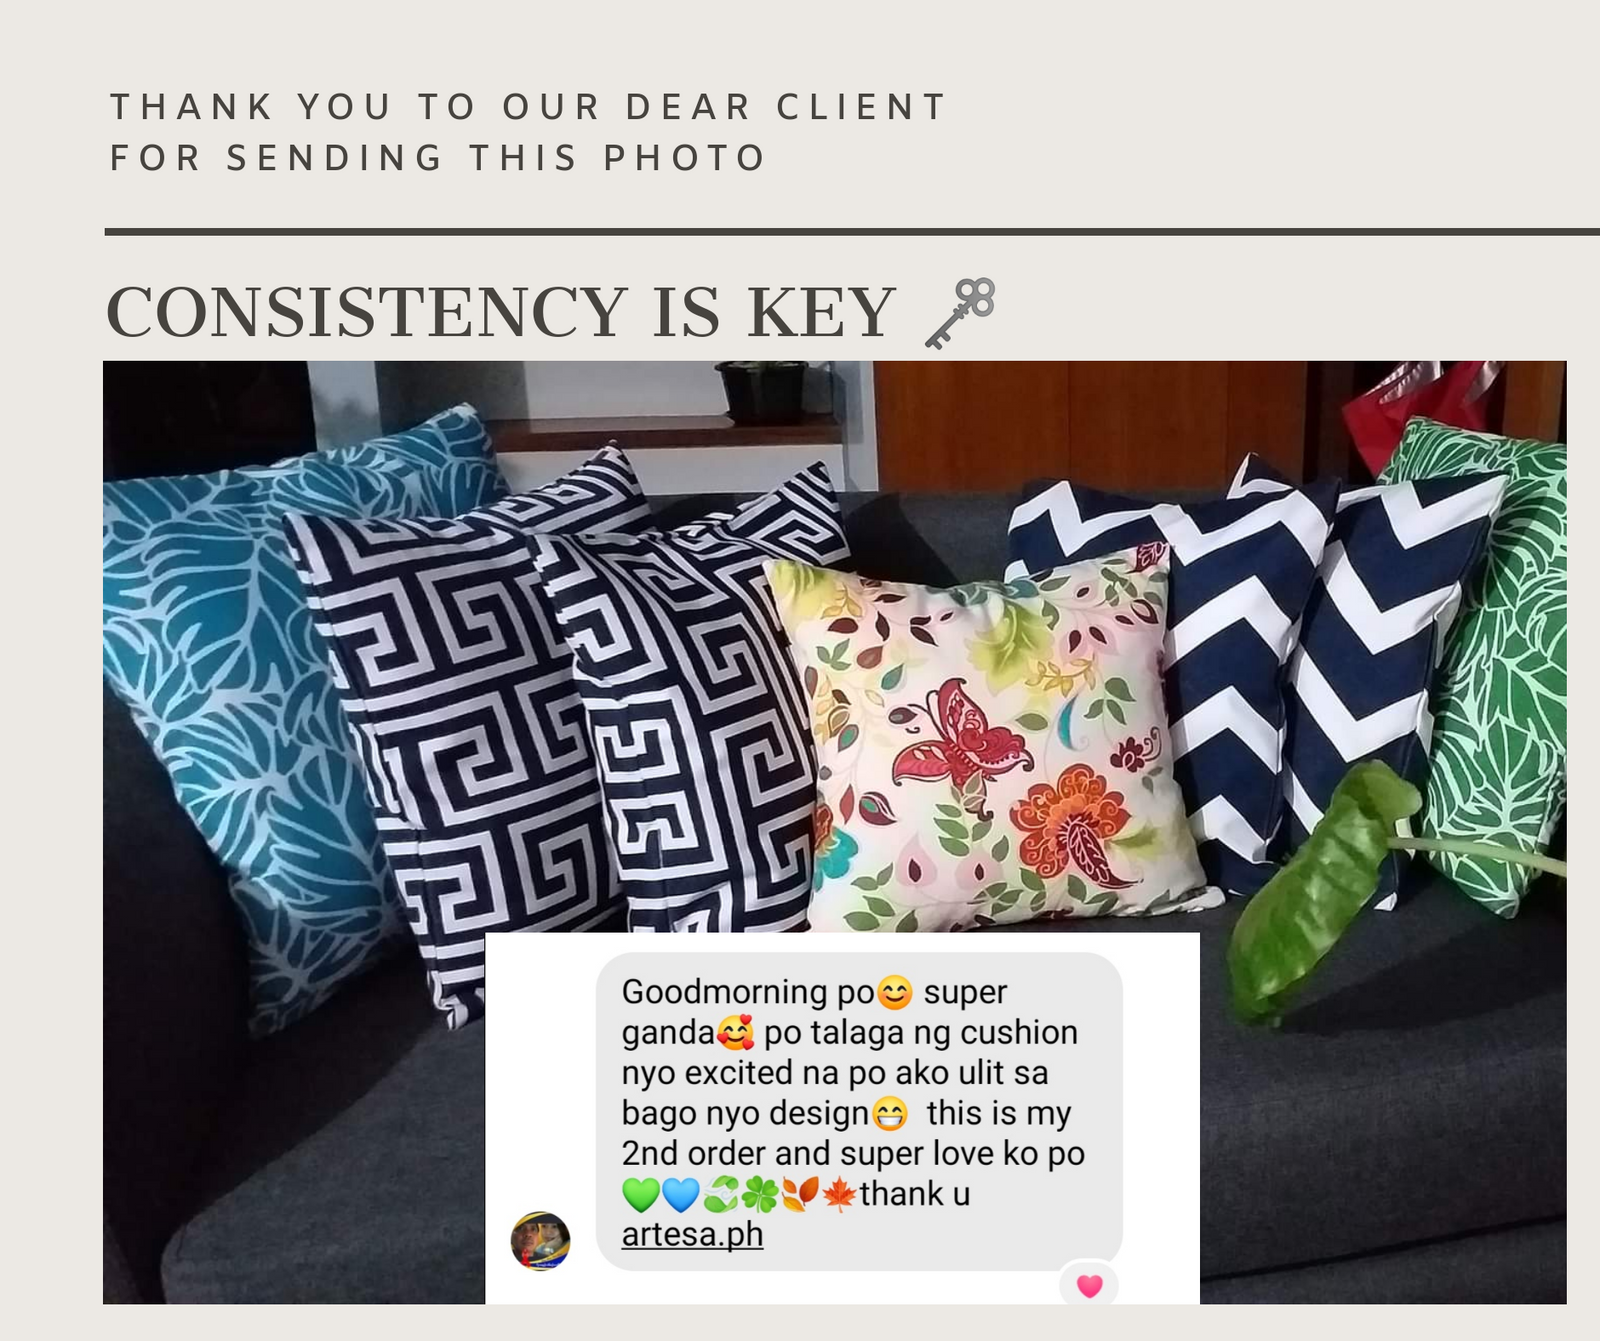 What our Clients say about our products